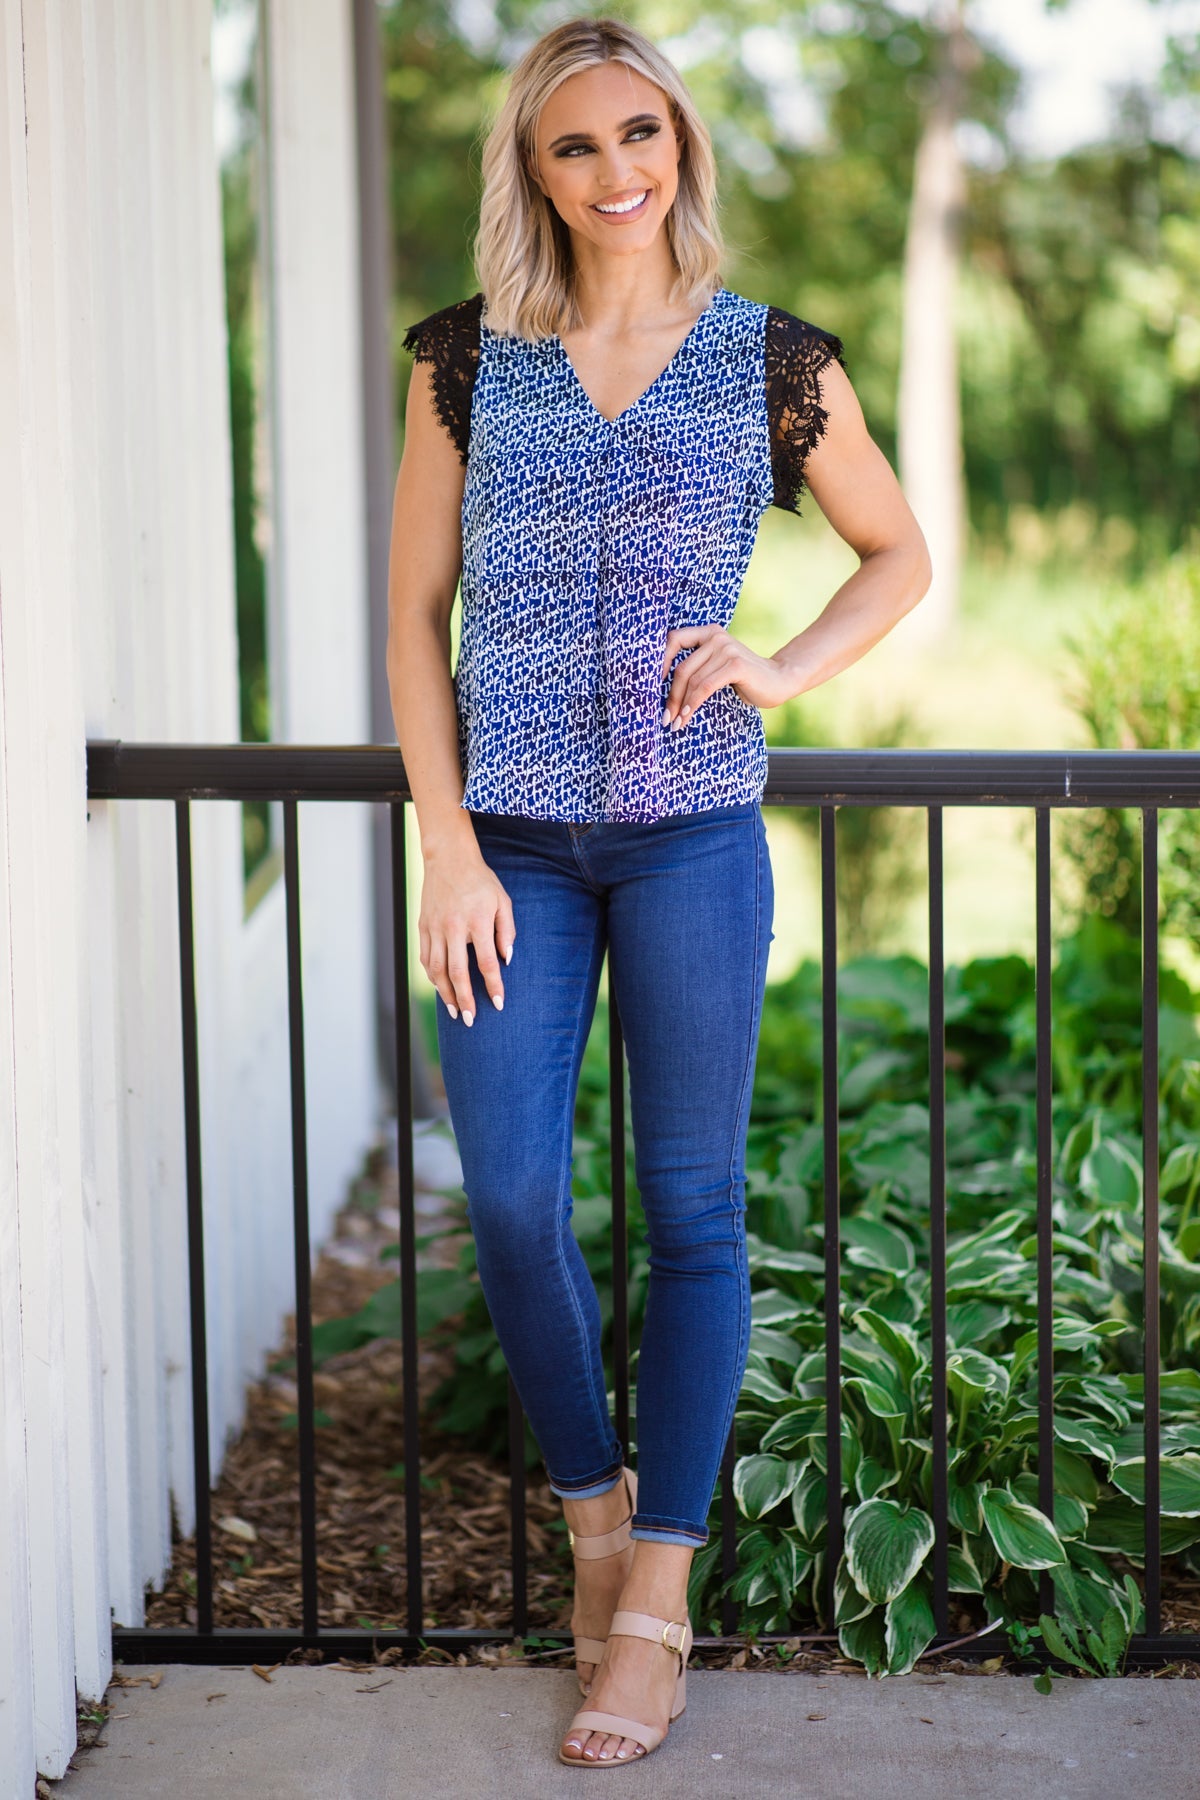 Blue Abstract Print Crochet Trim Top - Filly Flair